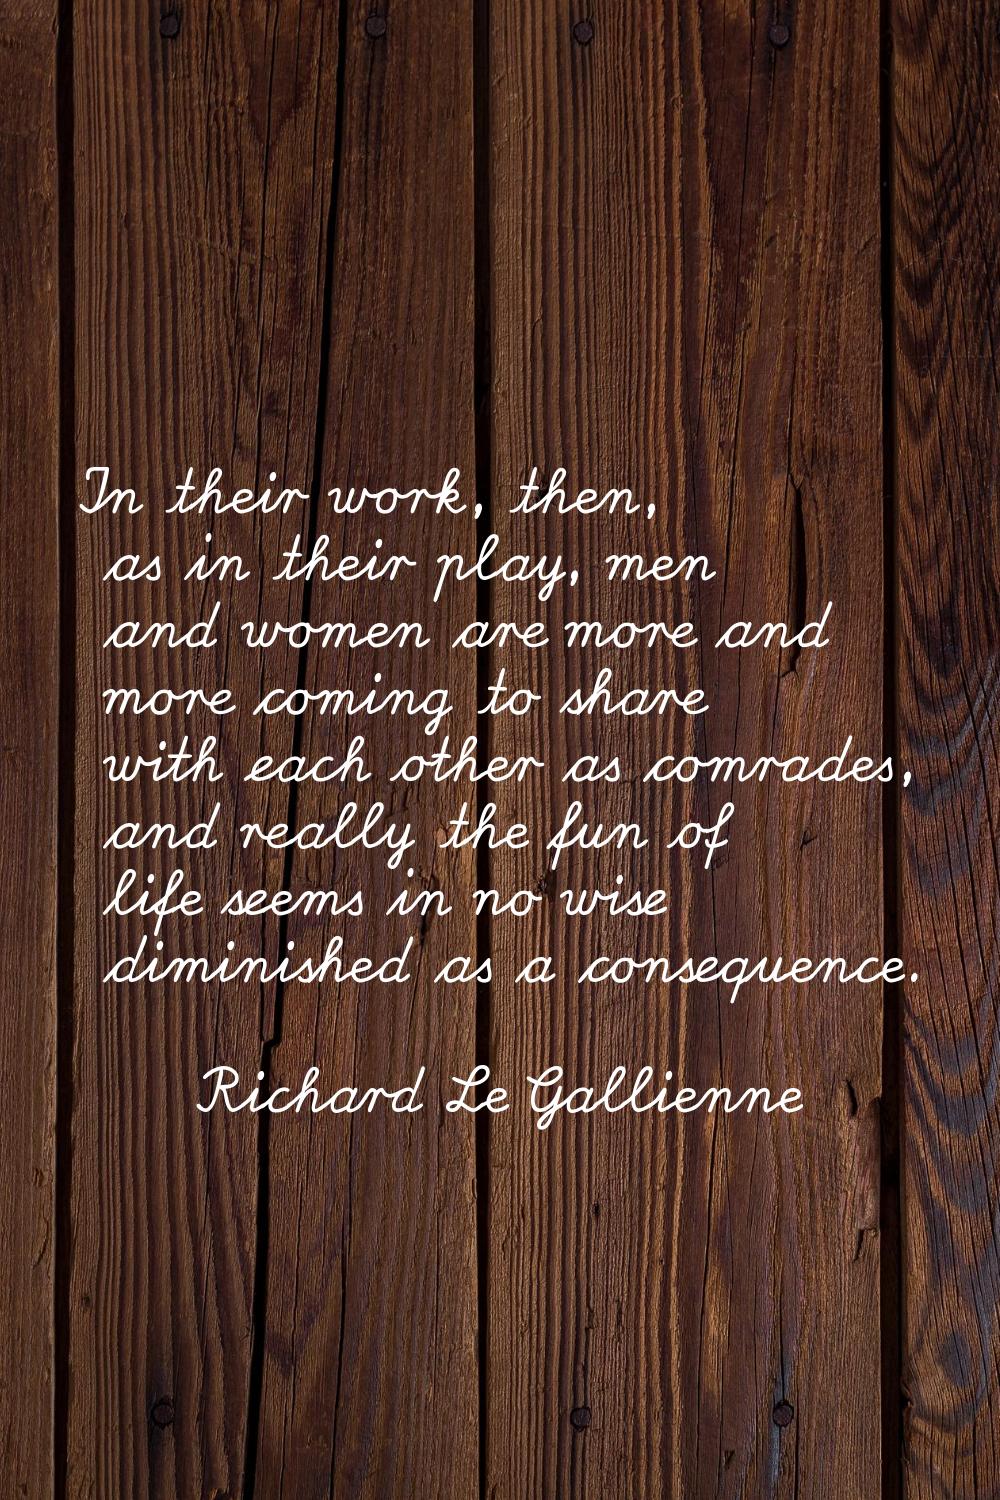 In their work, then, as in their play, men and women are more and more coming to share with each ot